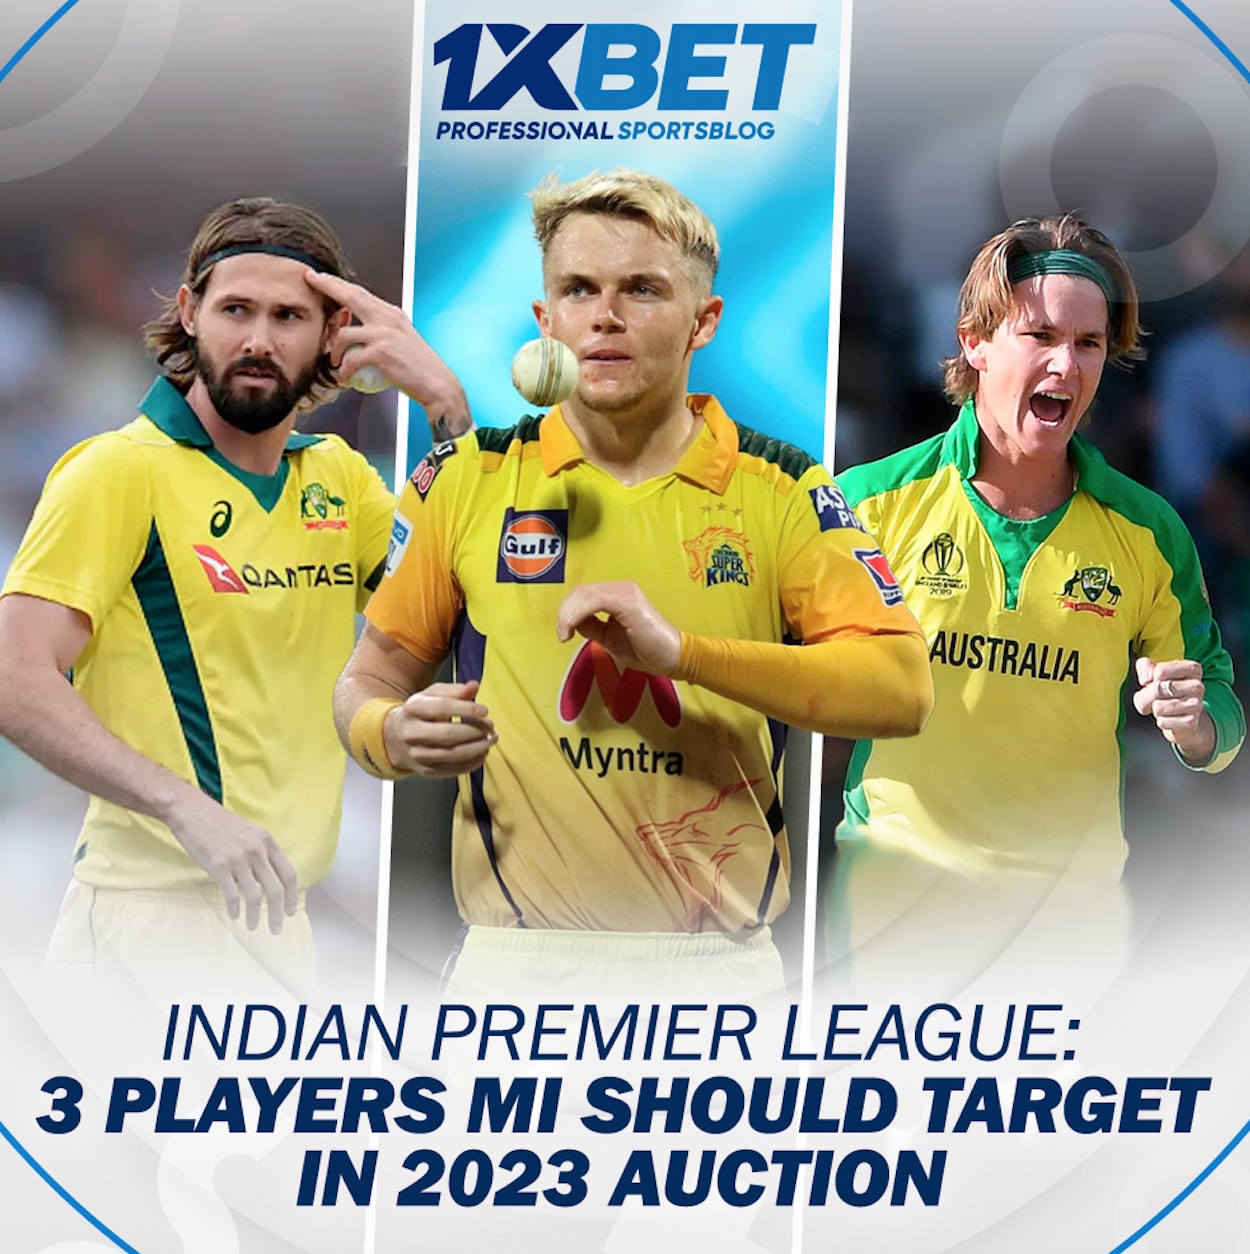 IPL: who should target Mumbai Indians in 2023 auction?